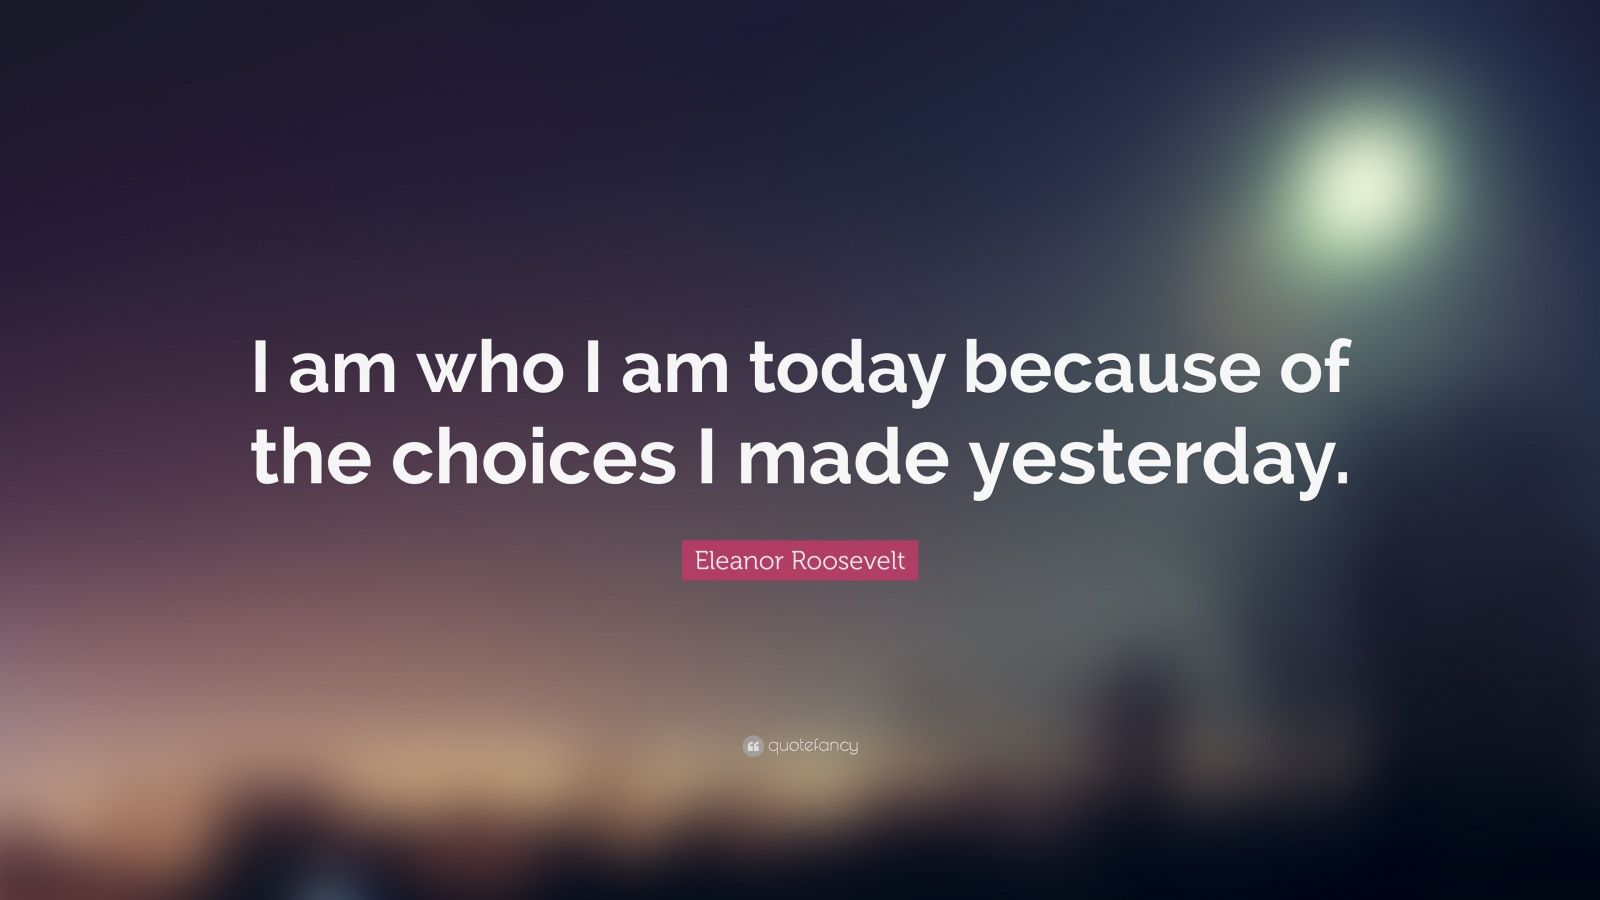 Eleanor Roosevelt Quote: “I am who I am today because of the choices I